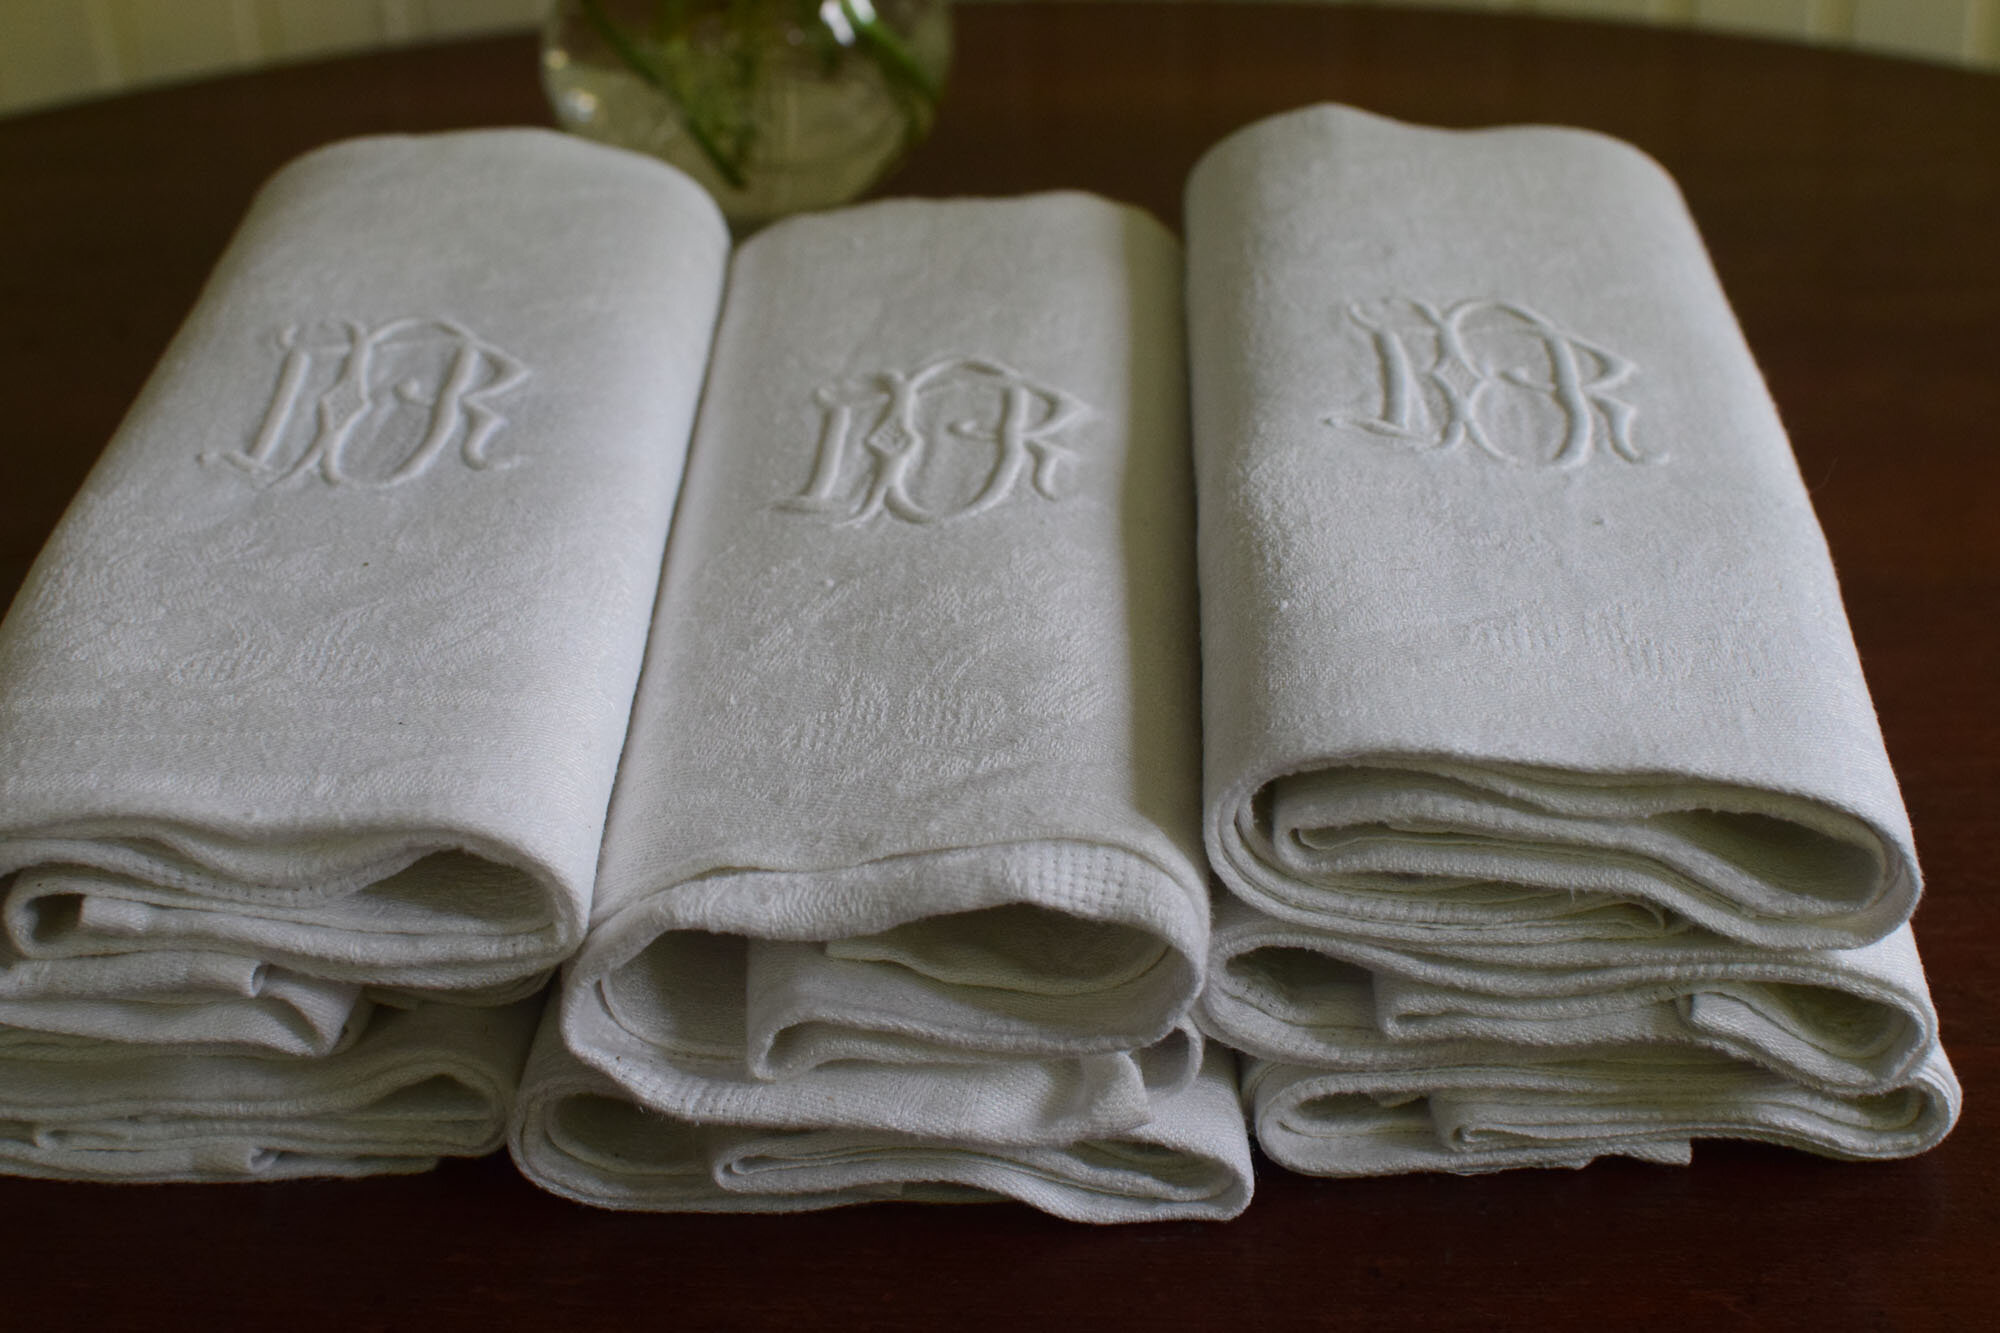 Hand sewn and embroidered Antique French damask in pure linen Very large 9 magnificent linen napkins with CC monograms Never used.